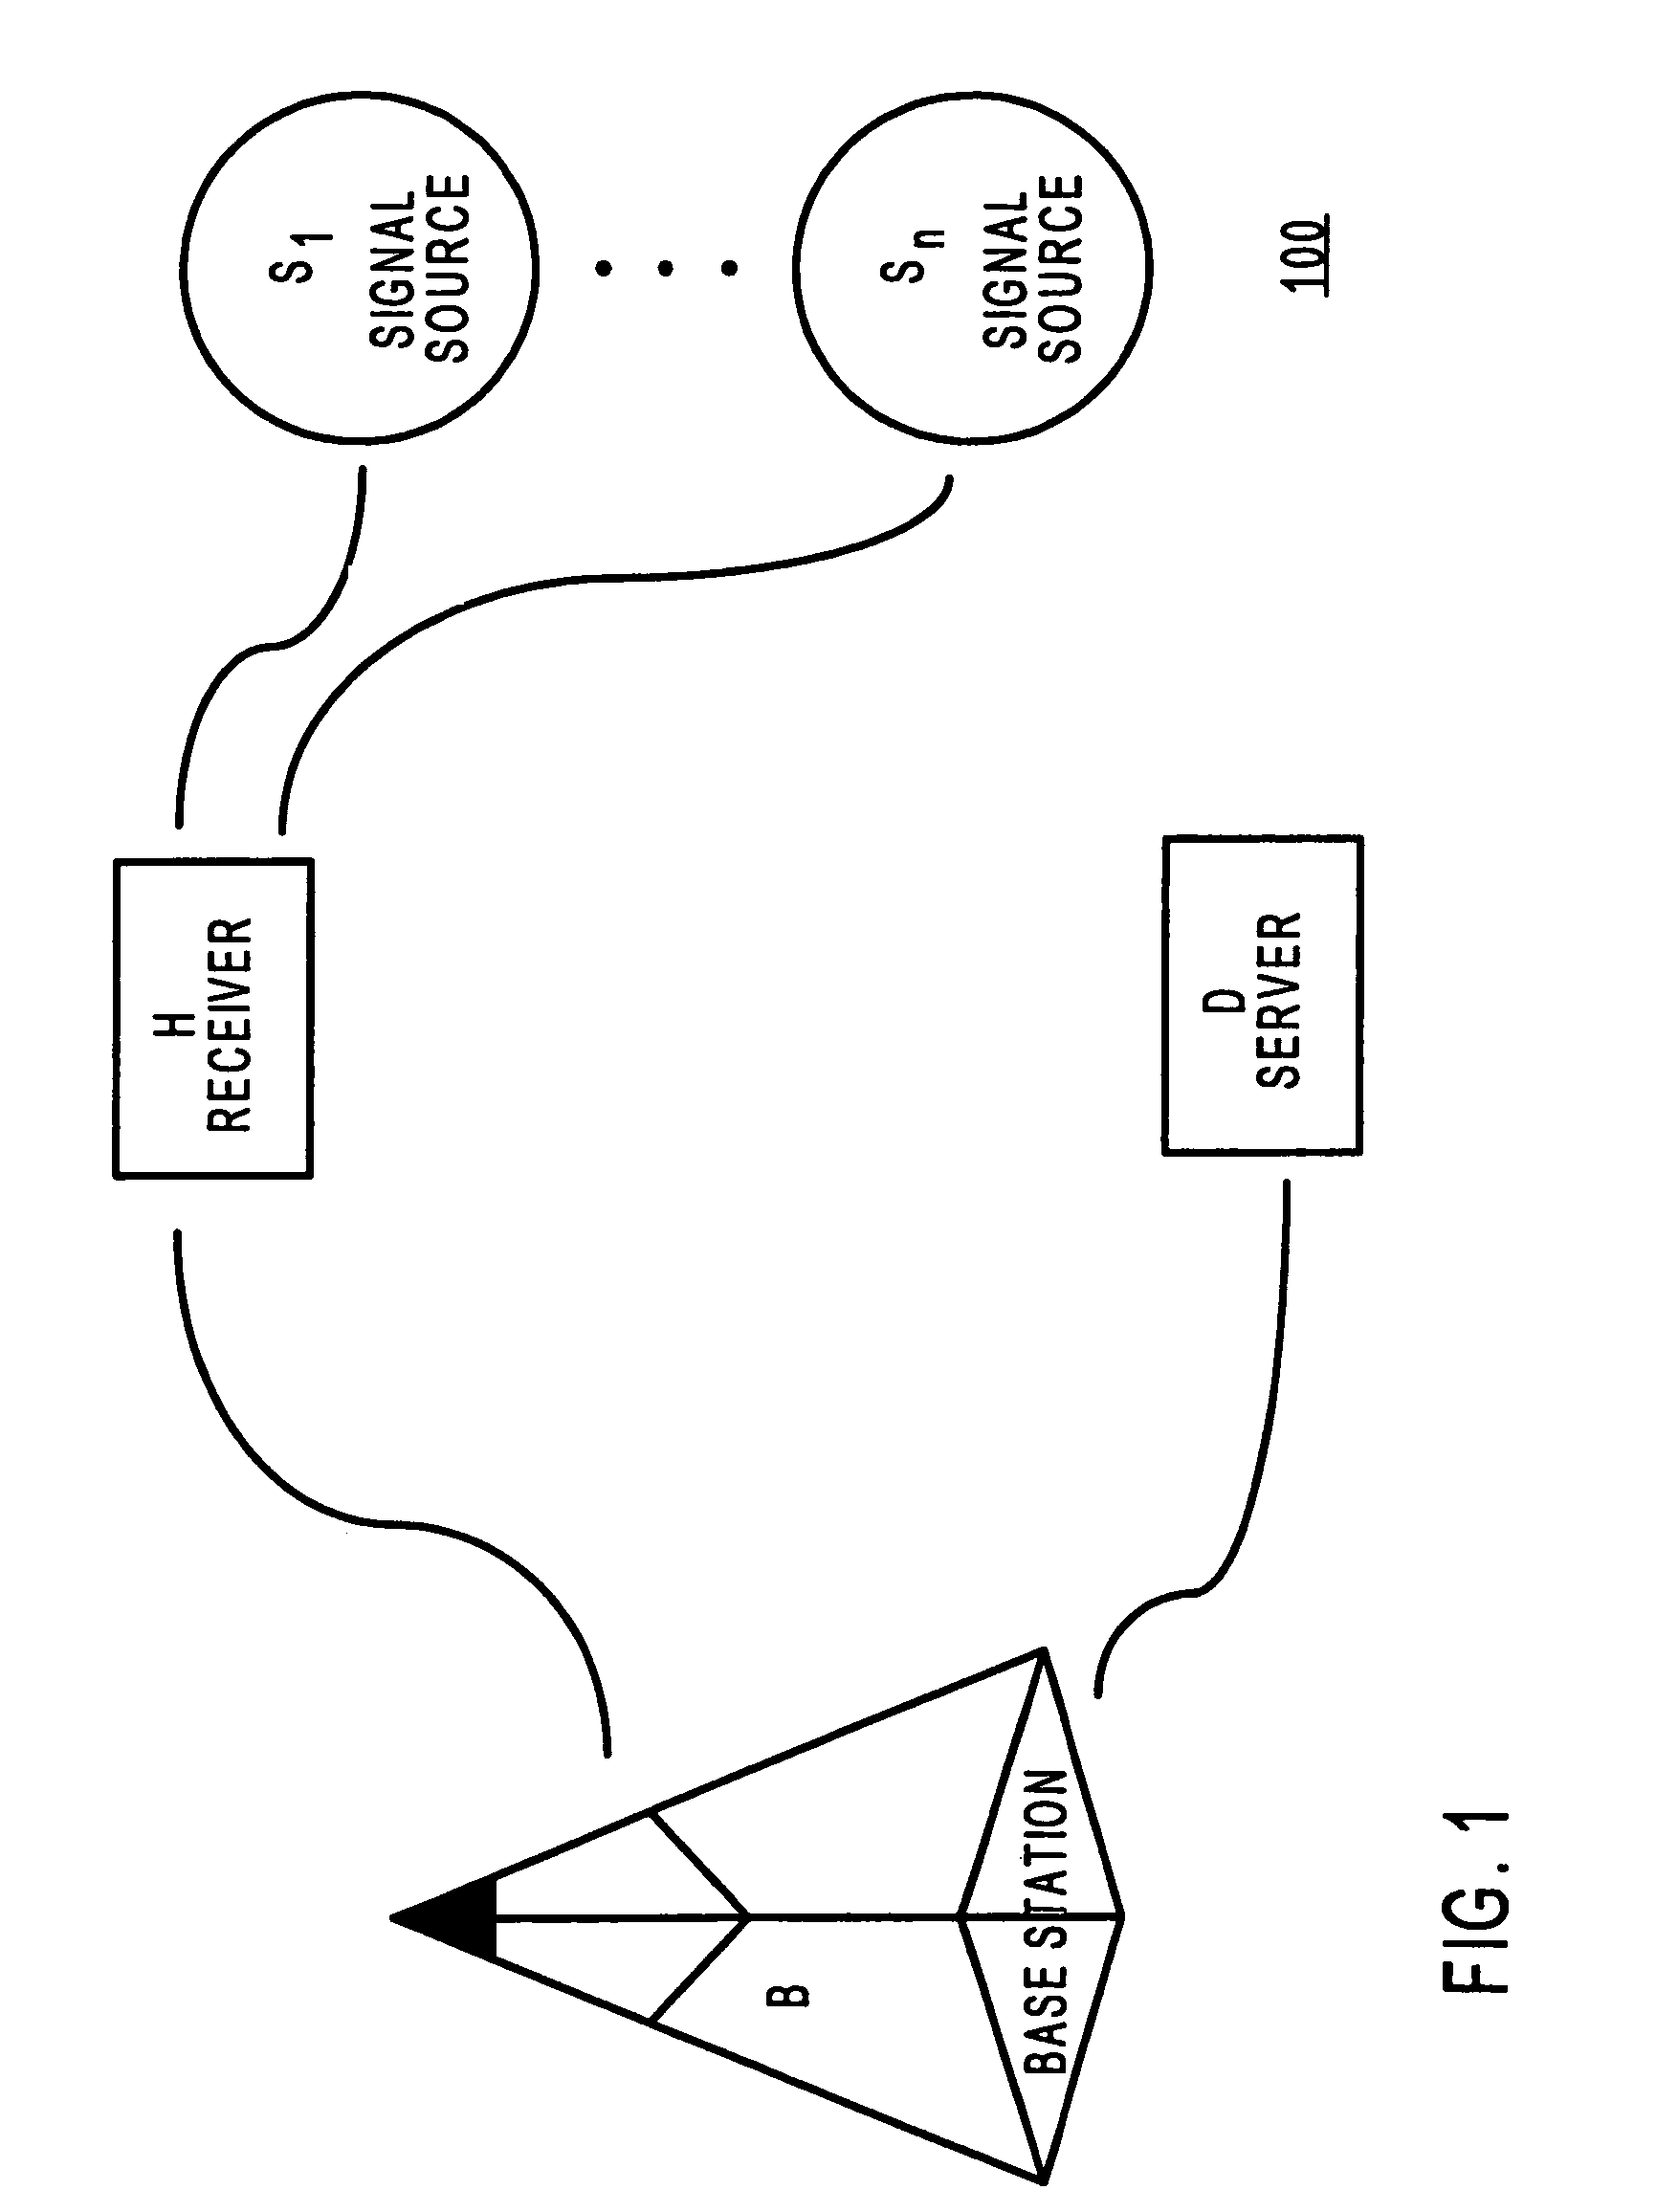 System and method to estimate the location of a receiver